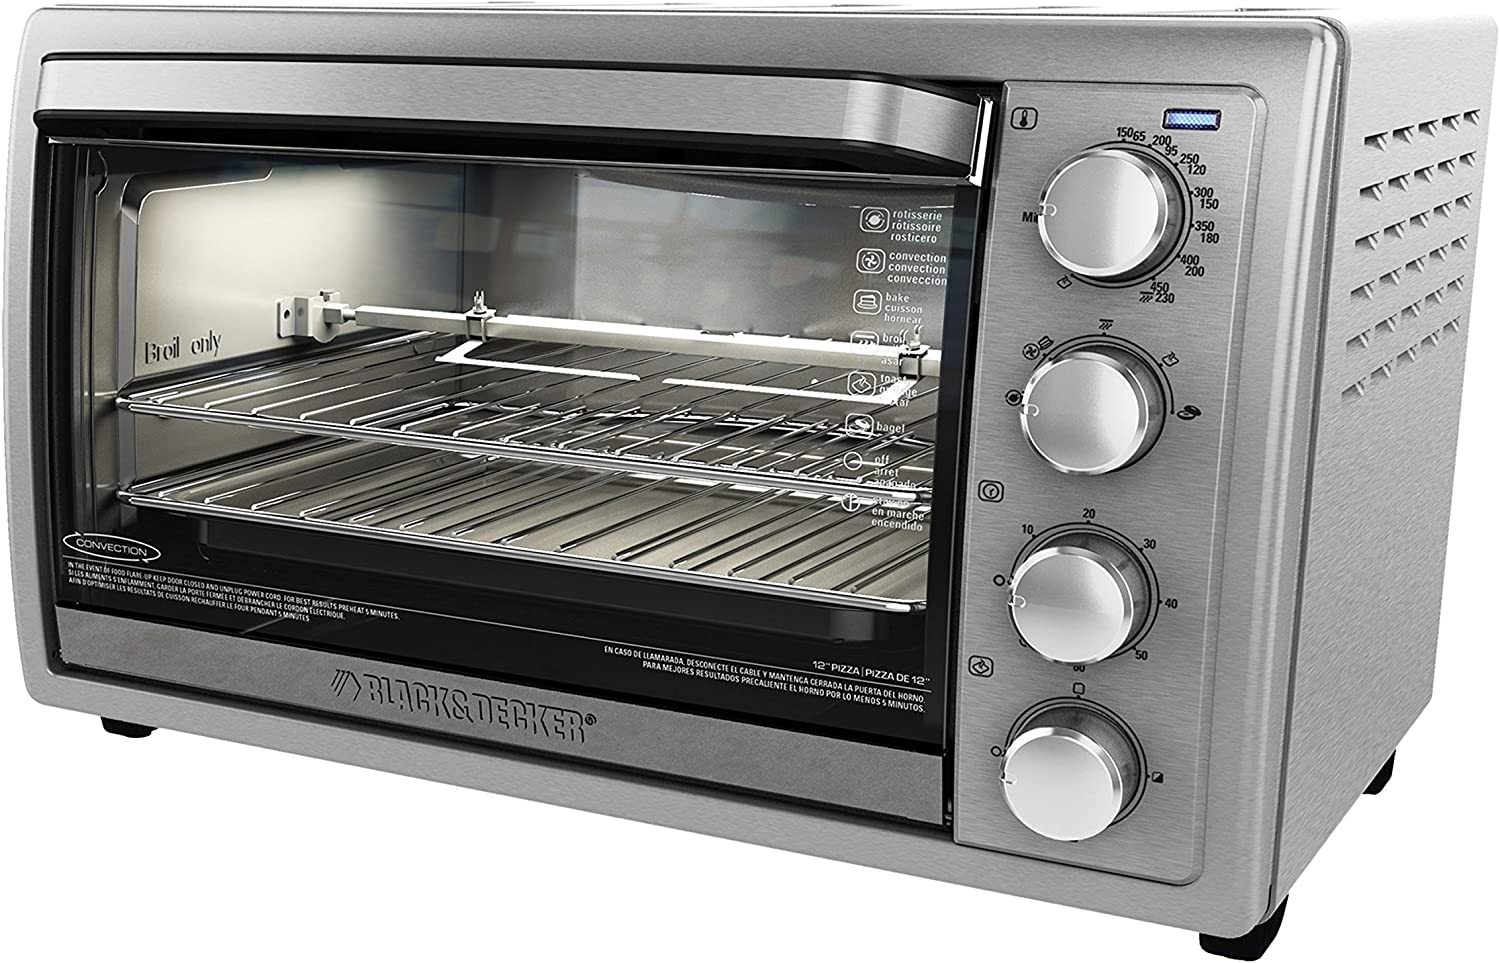 Black+Decker WCR-076 Rotisserie Toaster Oven, 9X13, Stainless Steel Import To Shop ×Product customization General Description